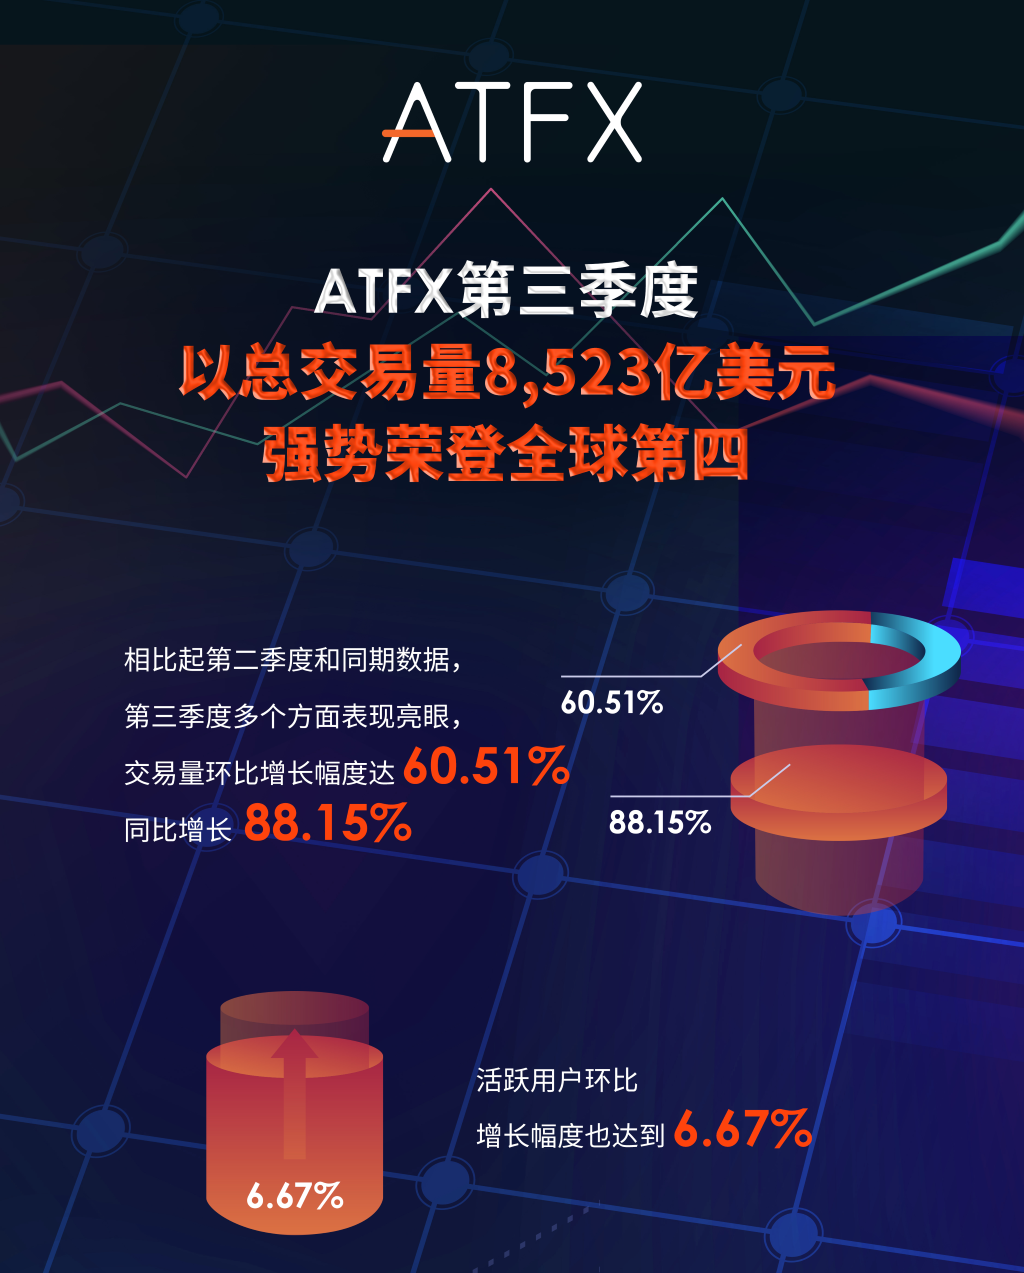 Fourth in the world!ATFXTrading volume exceeded in the third quarter8523Billion US dollars, leading the global market by a wide margin405 / author:atfx2019 / PostsID:1726995